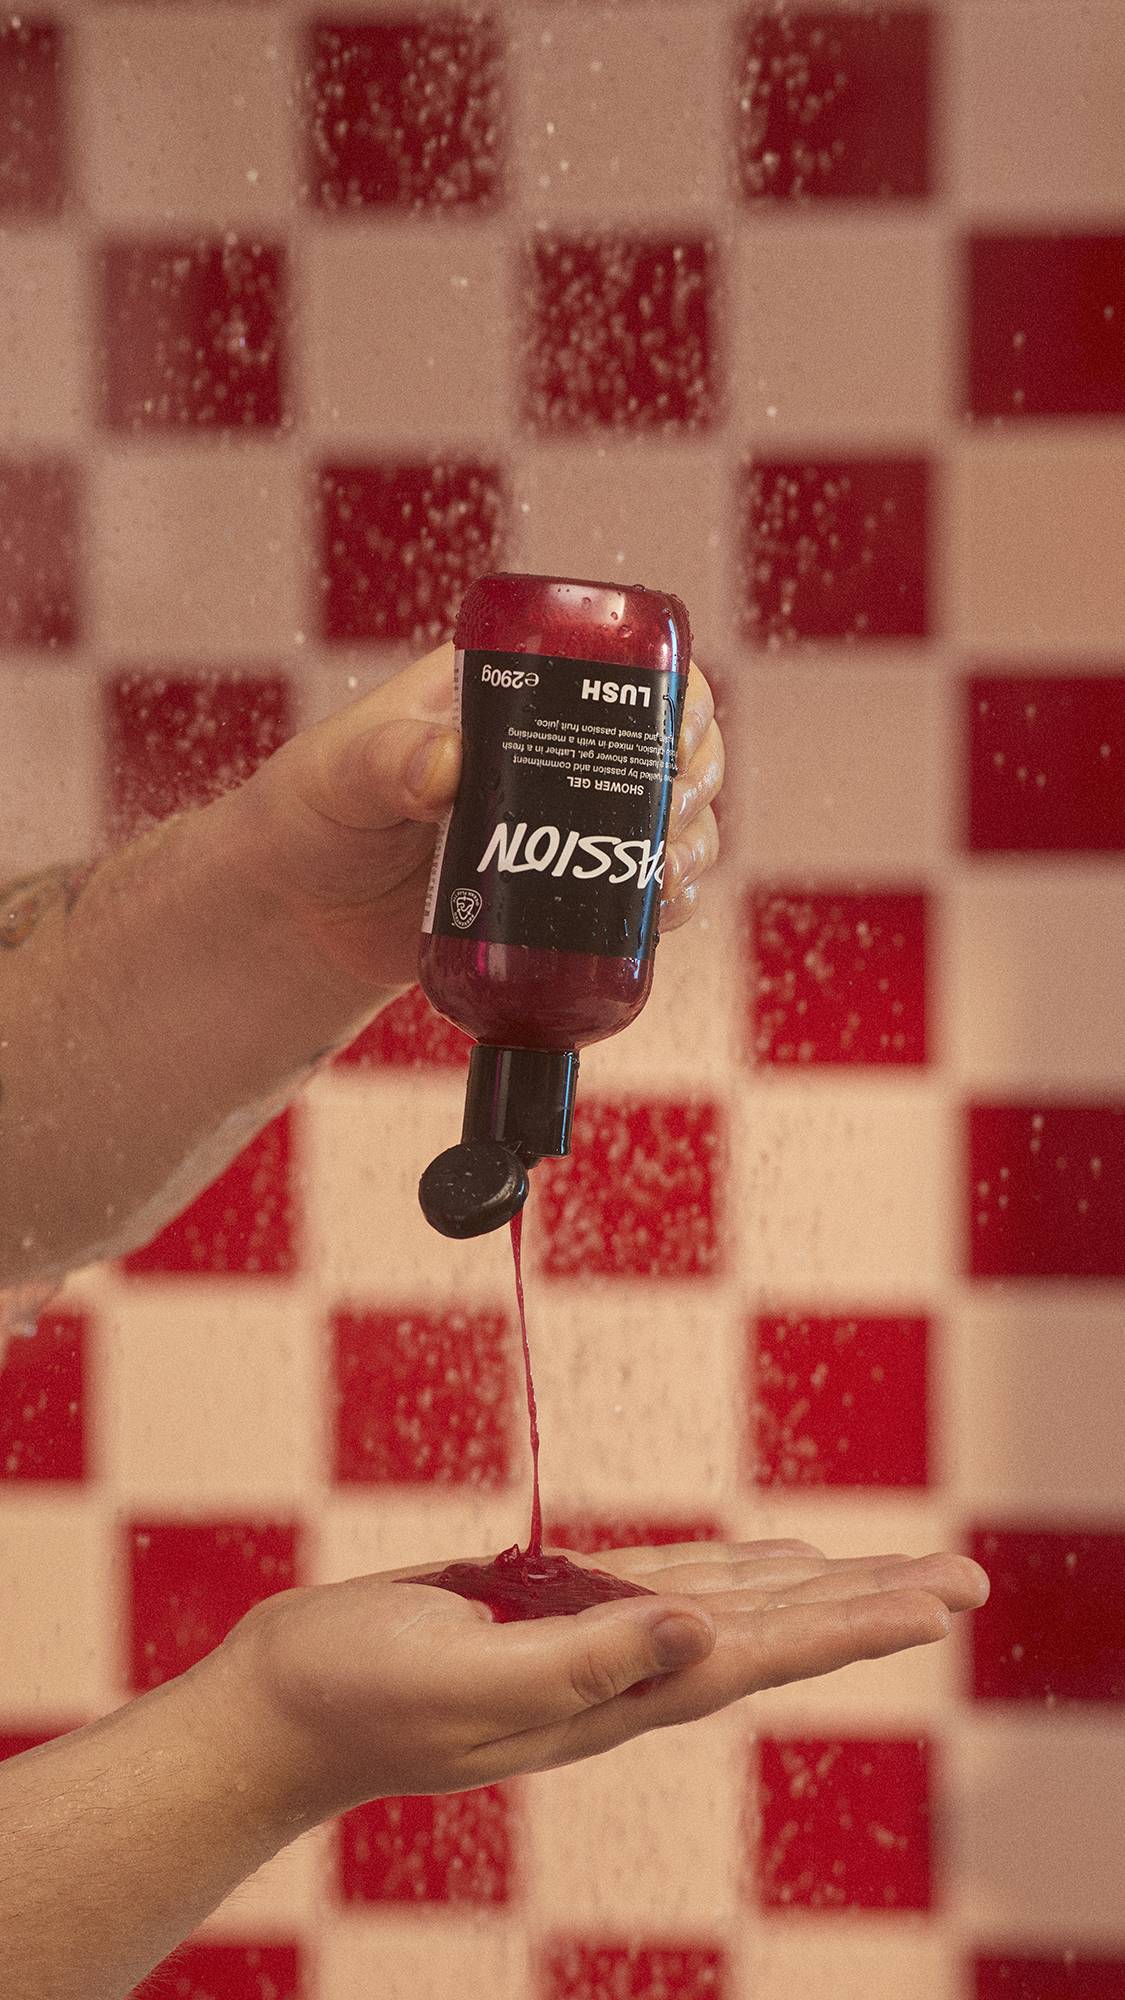 A close-up image of the model squeezing the bottle of Passion shower gel into their hand under running shower water.